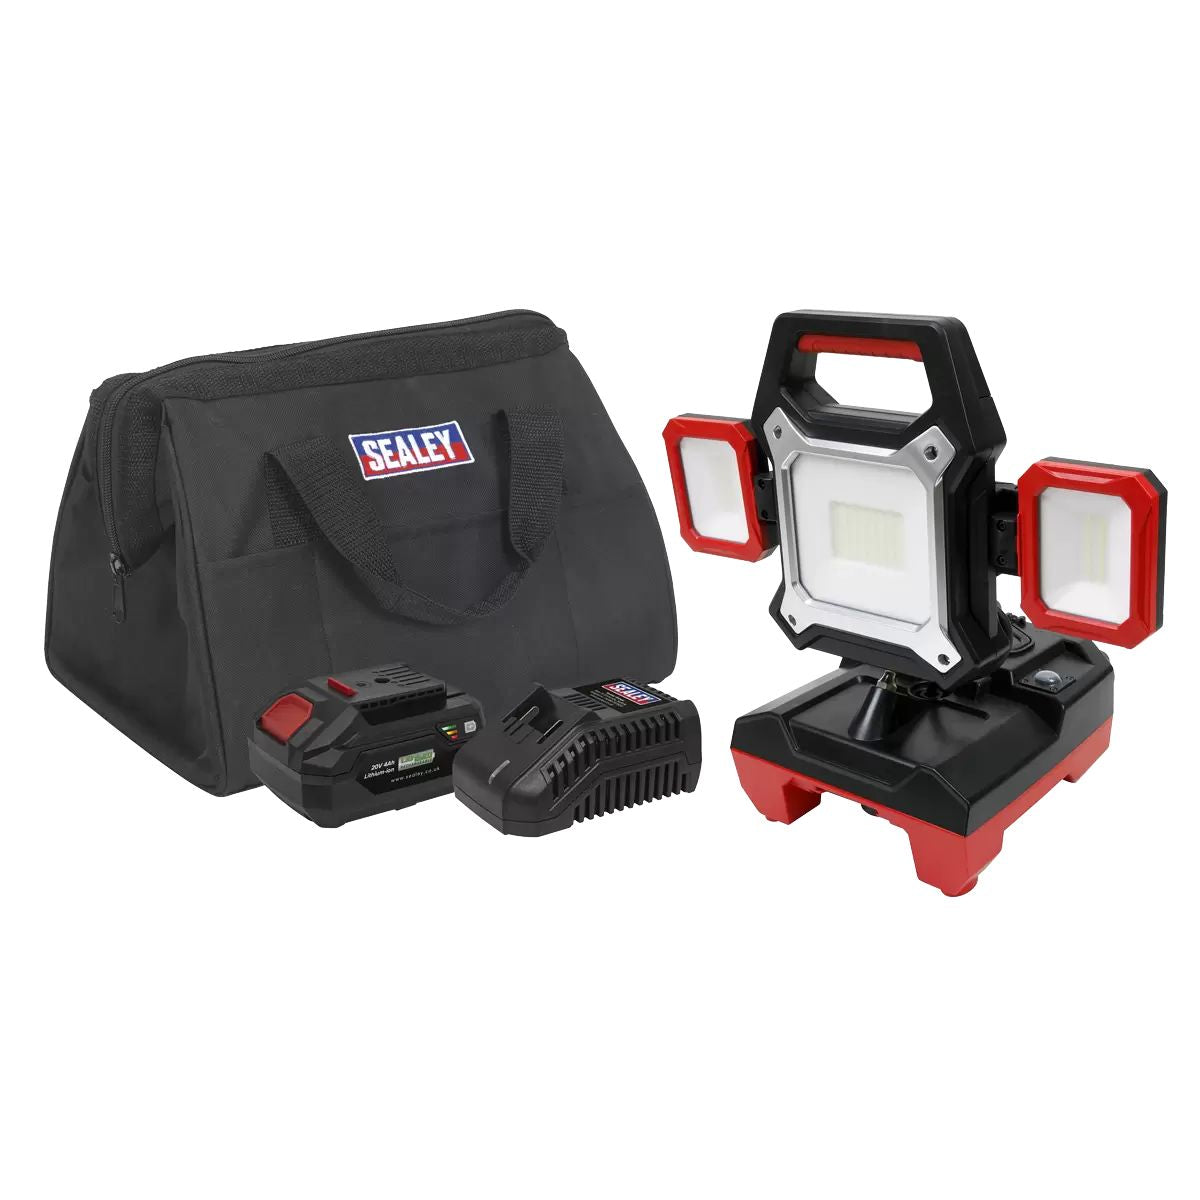 Sealey CP20VWLKIT1 Cordless/Corded 2-in-1 Work Light Kit With Battery & Charger